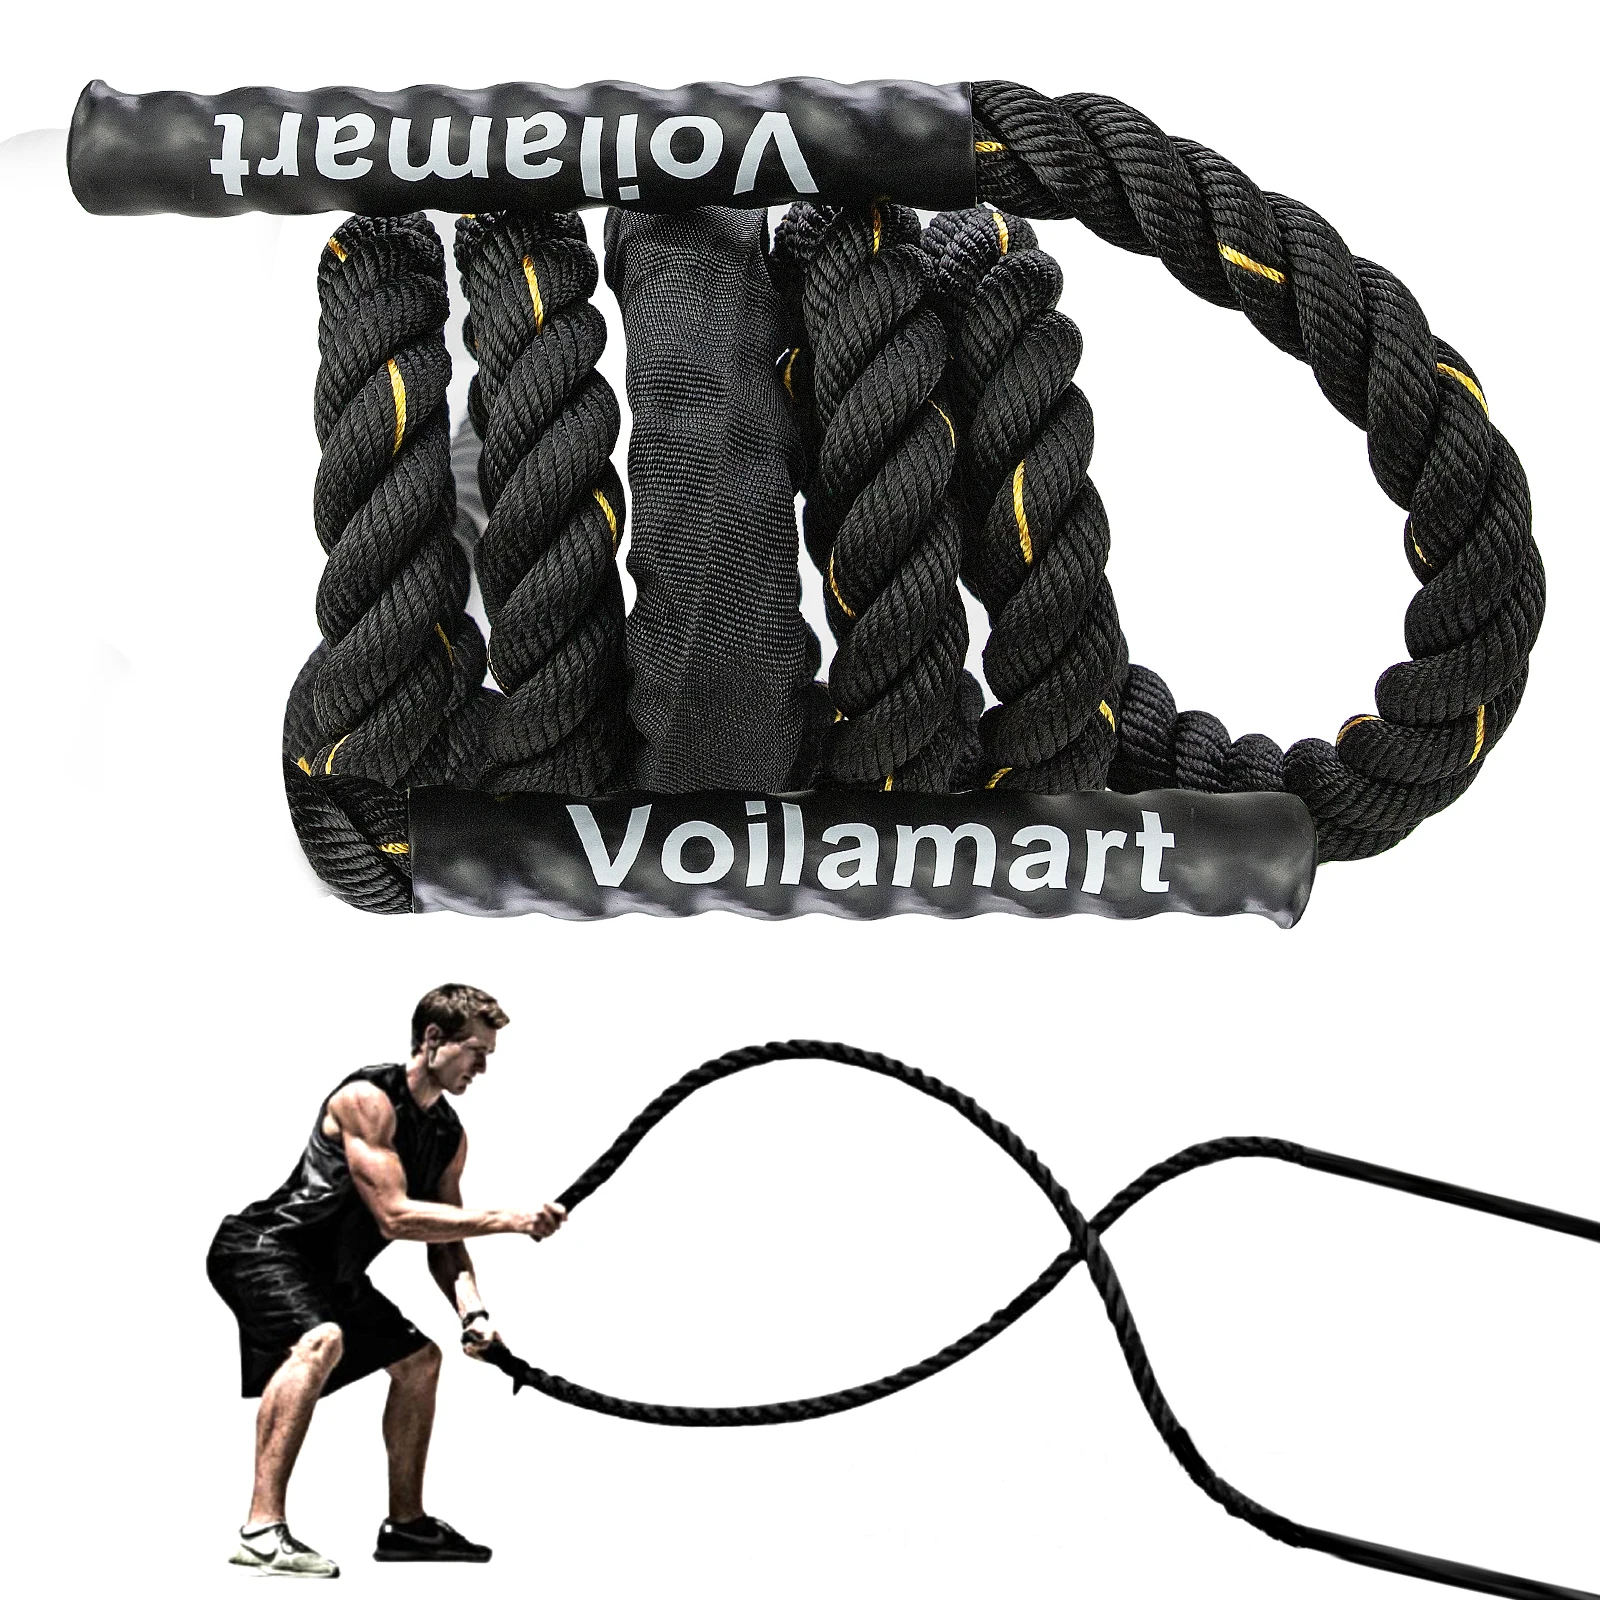 

Voilamart 3LB-5LB/10FT Heavy Jump Rope Crossfit Weighted Battle Skipping Ropes Power Improve Strenght Training Fitness Home Gym